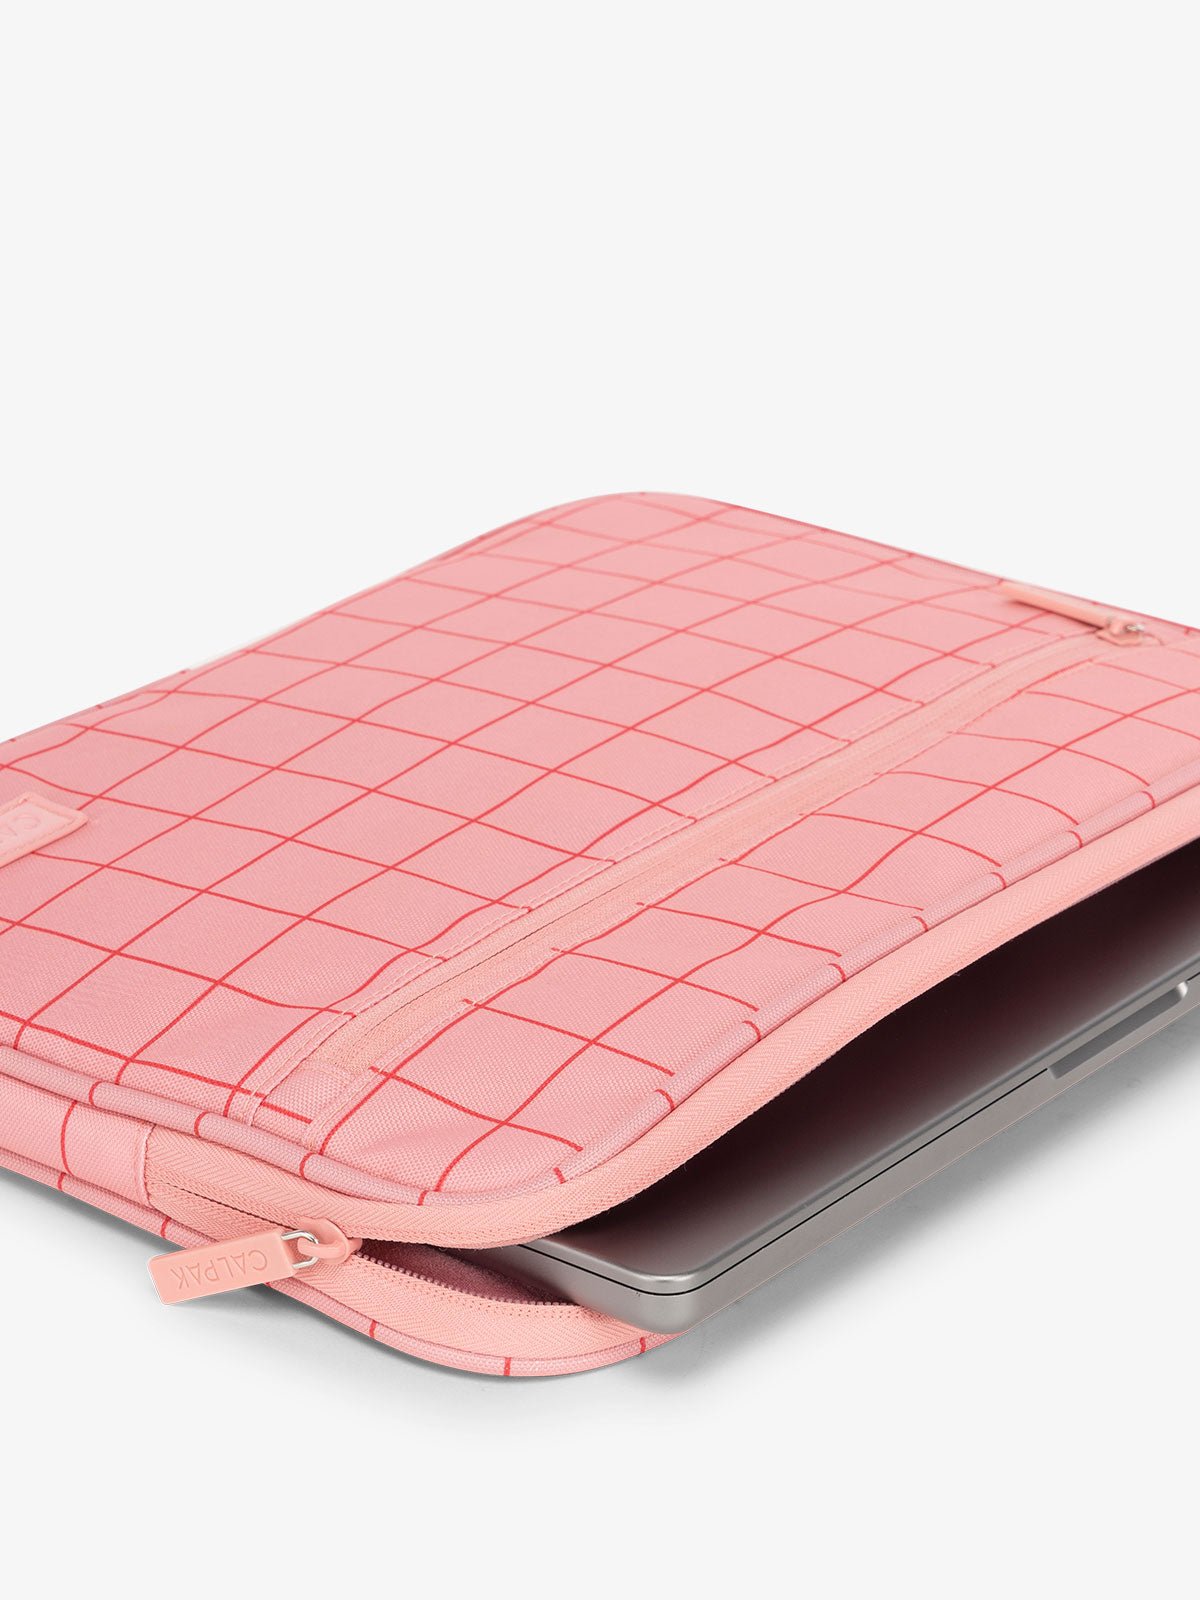 CALPAK 13-14" laptop sleeve with front zipper pouch in pink grid